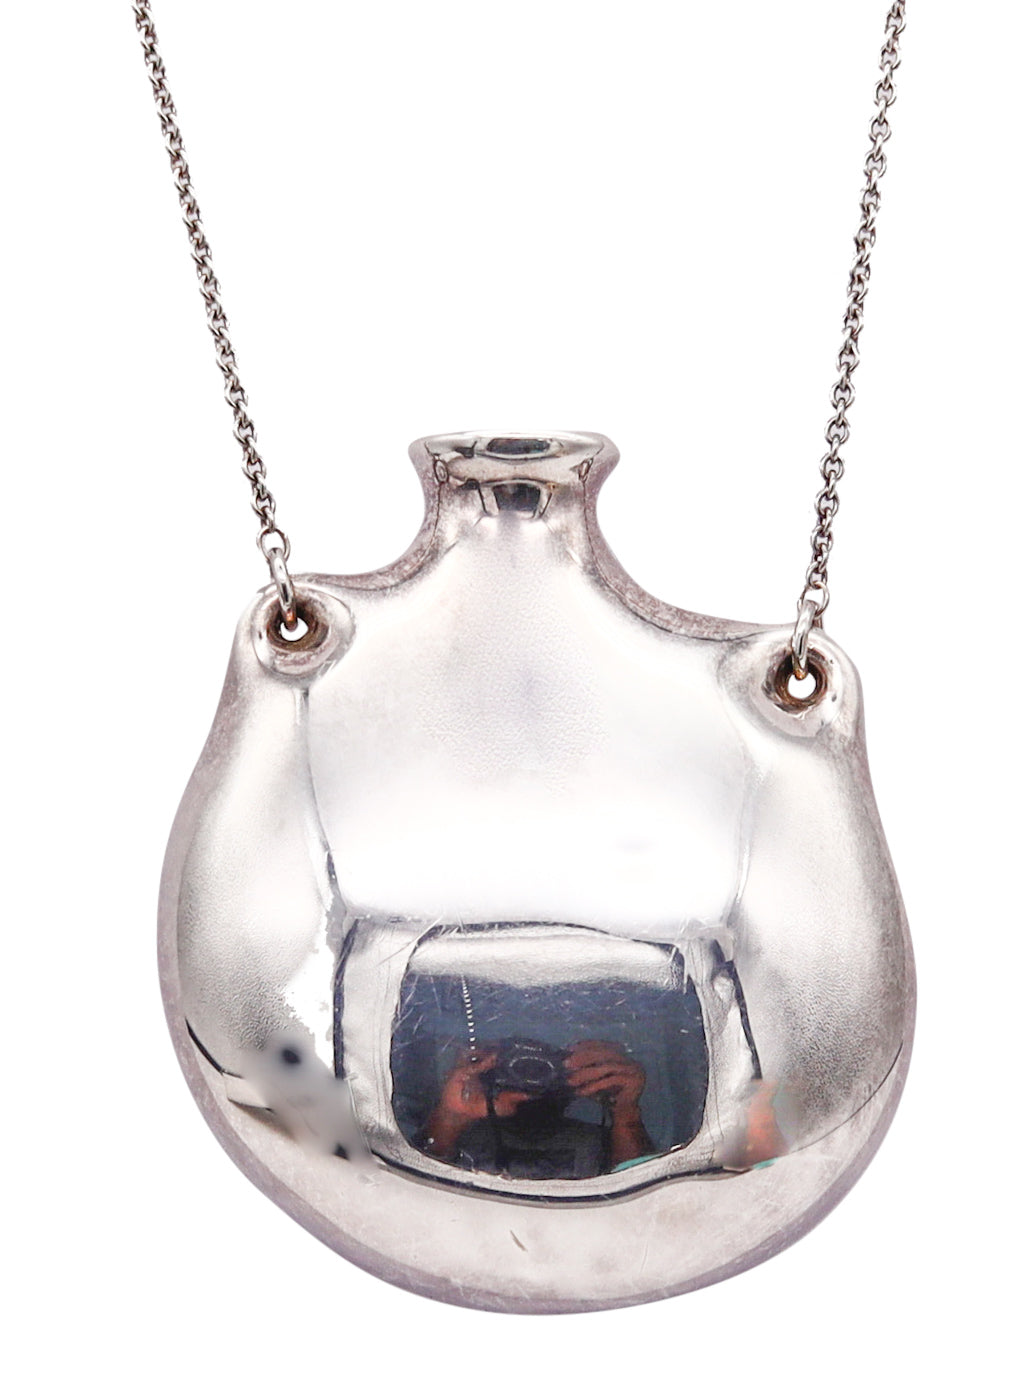 Tiffany & Co. 1977 By Elsa Peretti Extra Large Freeform Open Bottle Necklace in 925 Sterling Silver